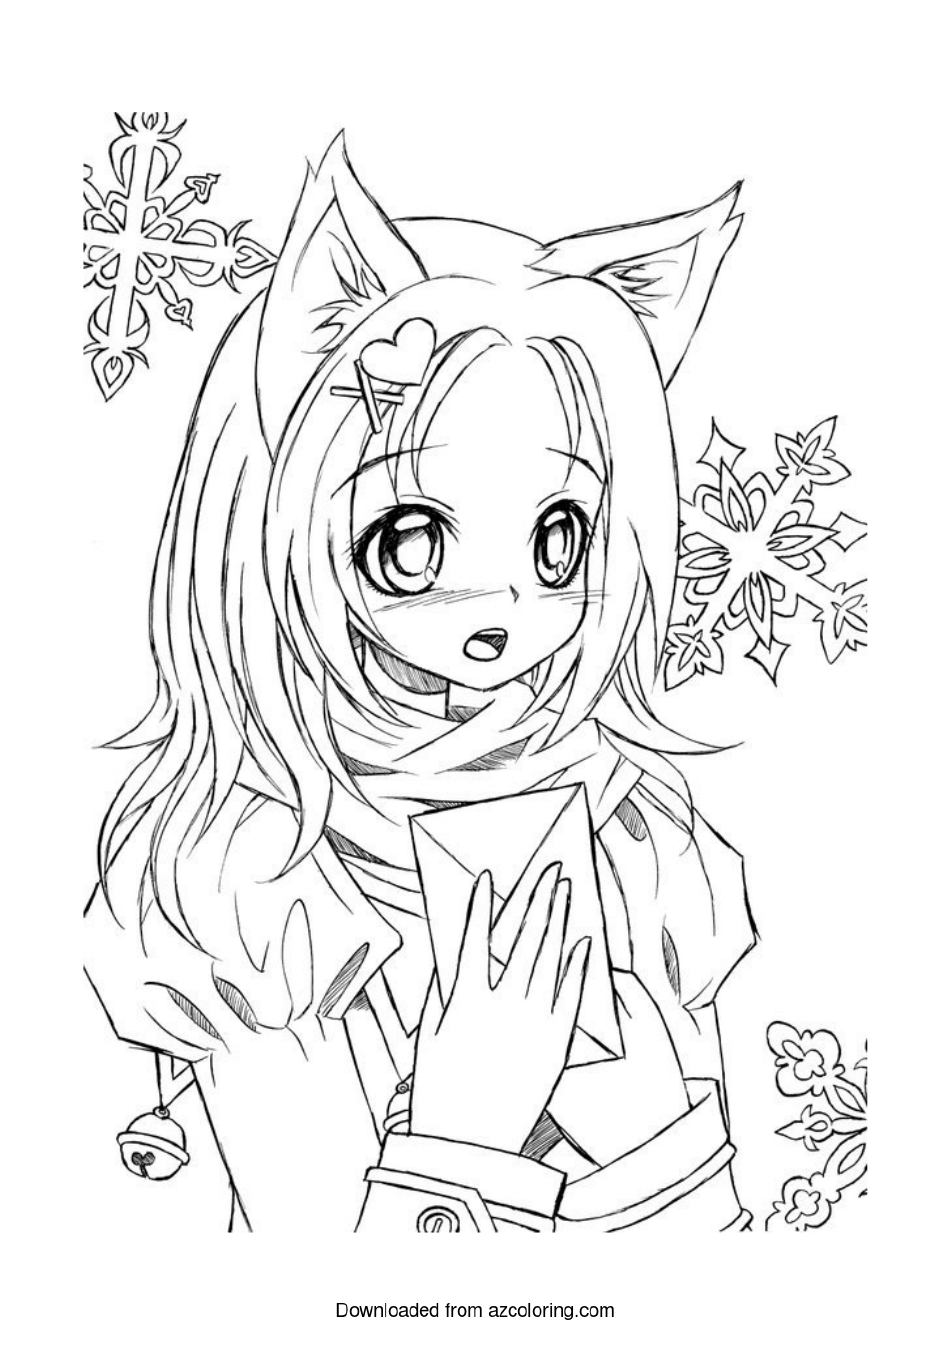 Discover 82+ coloring pages anime latest - in.duhocakina